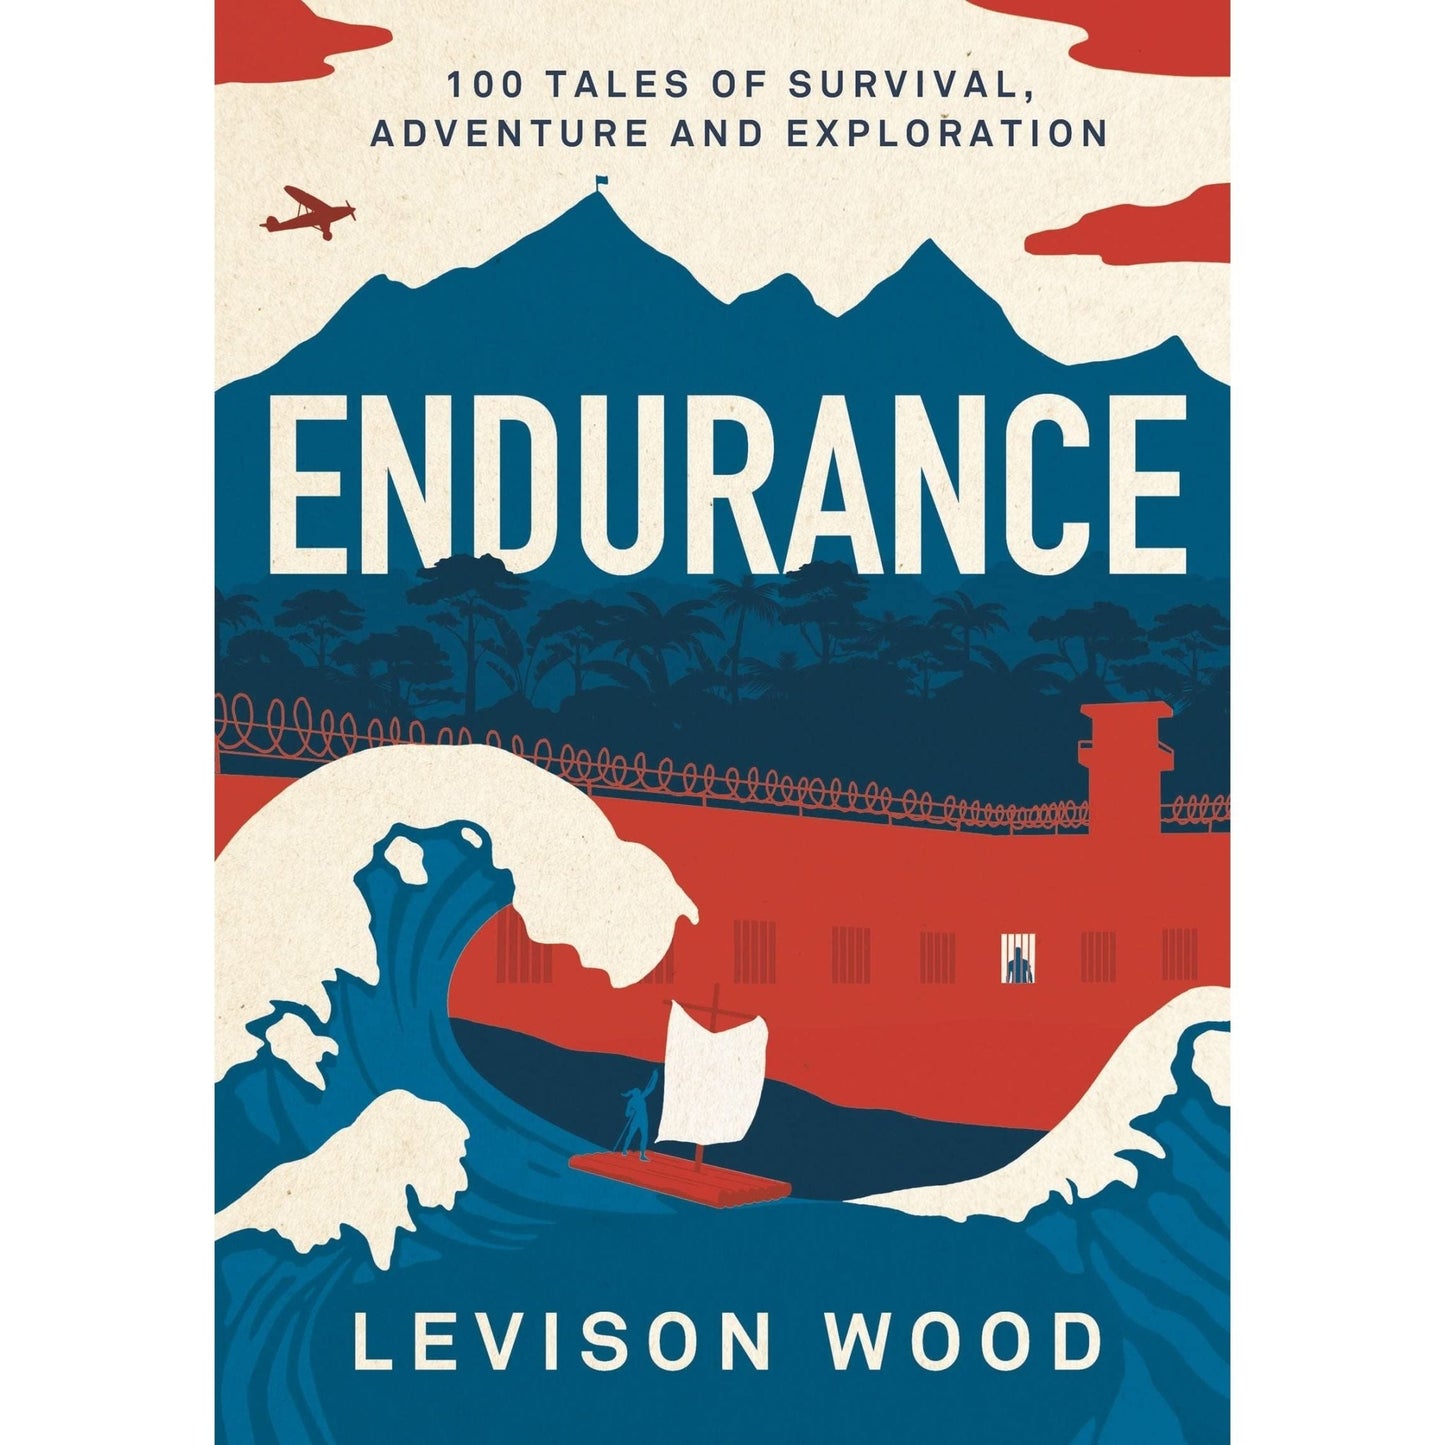 Endurance by Levison Wood - ABF The Soldiers' Charity Shop